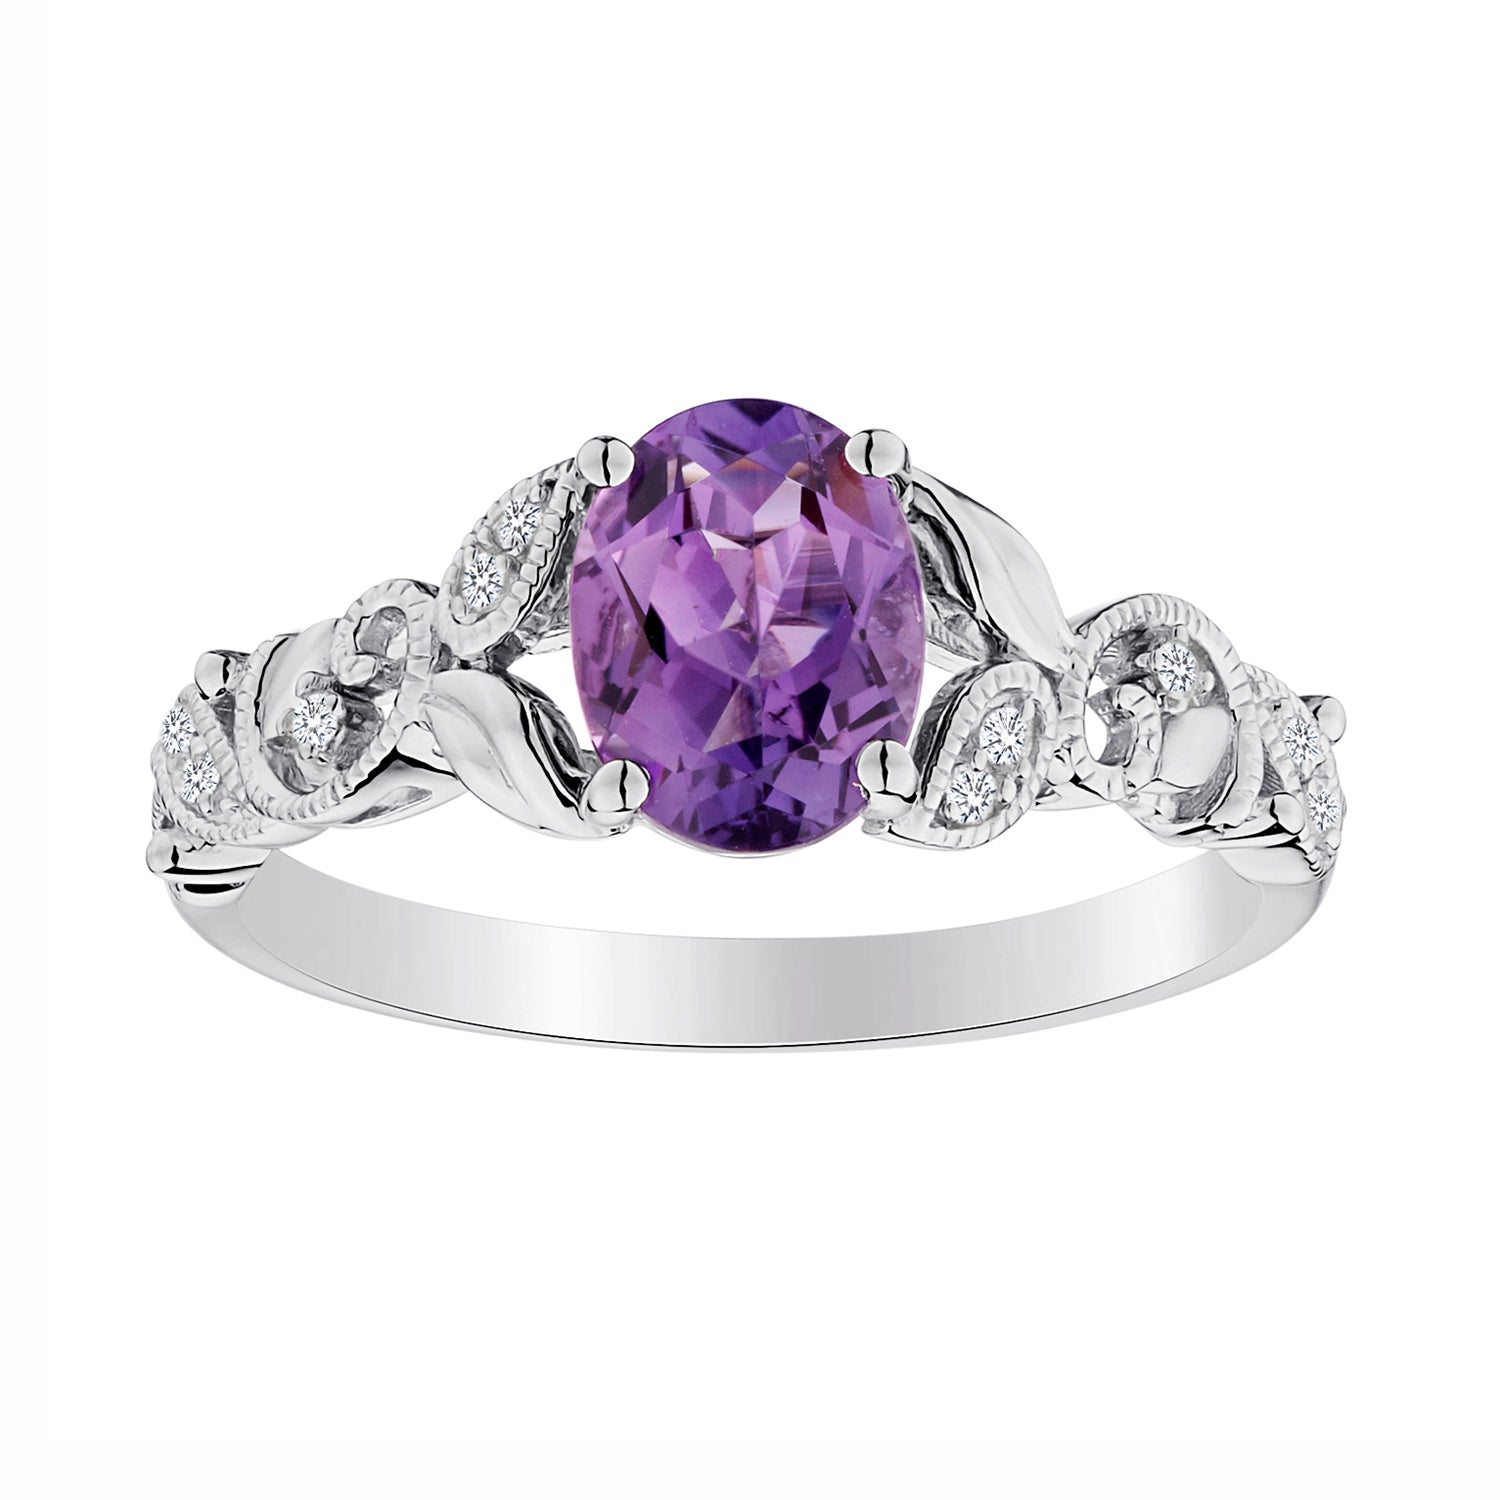 GENUINE AMETHYST, CREATED WHITE SAPPHIRE RING, SILVER.....................NOW